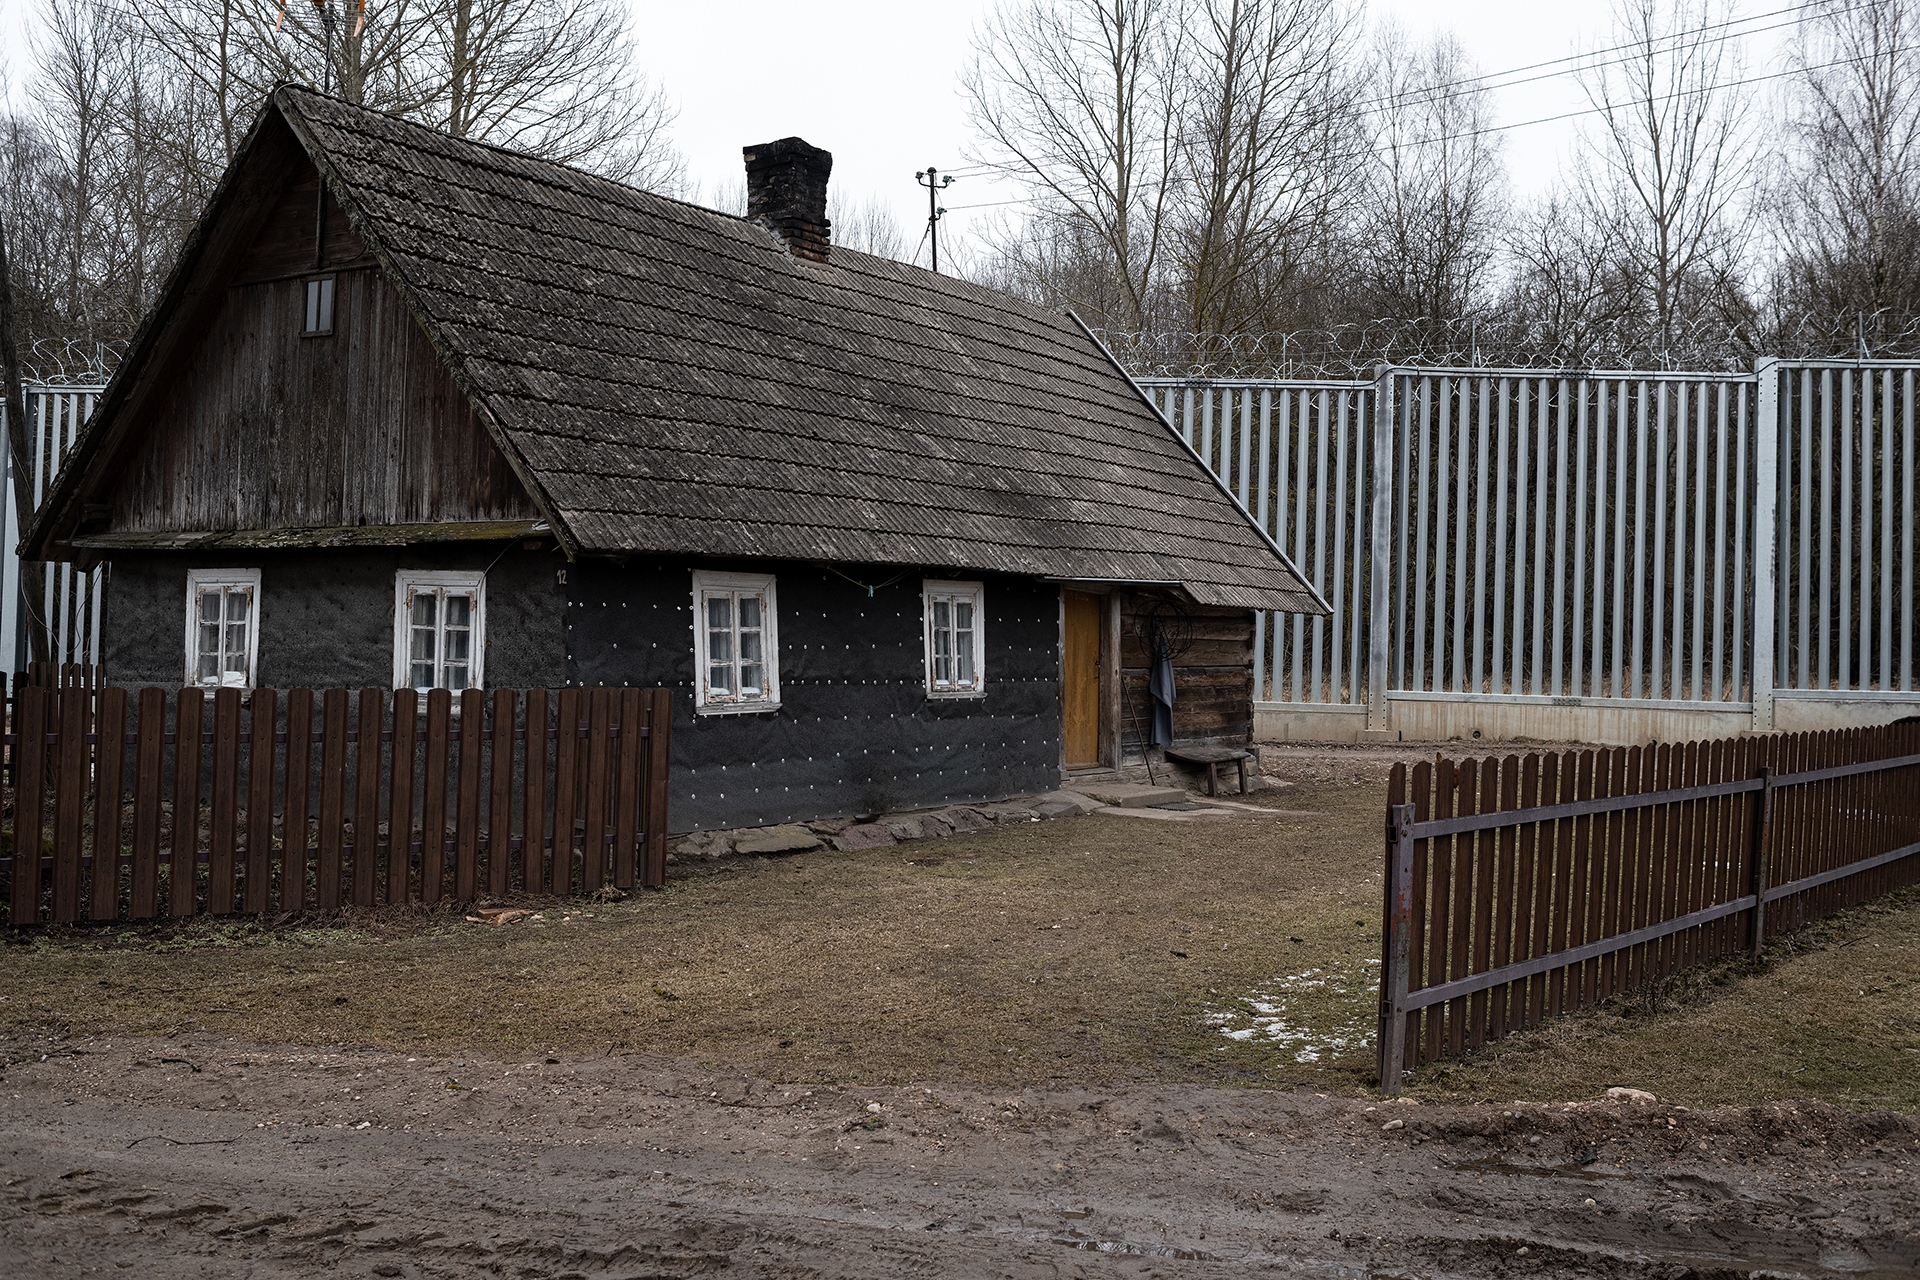   Photo (H.J.): One house in Tolcze, a village near the...